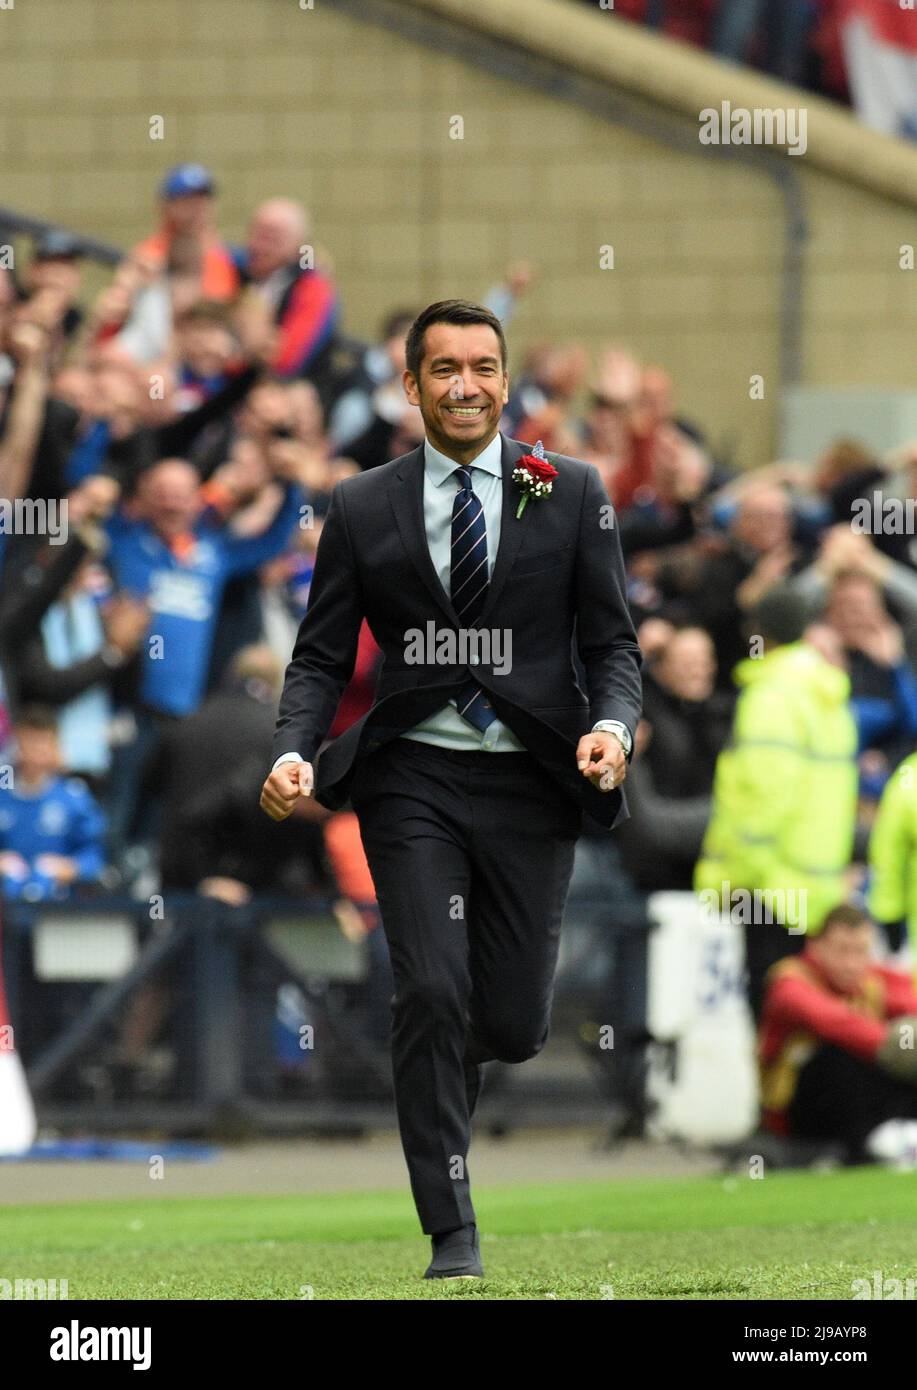 Hampden Park.Glasgow.Scotland, UK. 21st May, 2022. Rangers vs Heart of Midlothian. Scottish Cup Final 2022 Giovanni van Bronckhorst, manager of Rangers FC runs in to join the celebrations after 2nd goal Credit: eric mccowat/Alamy Live News Stock Photo